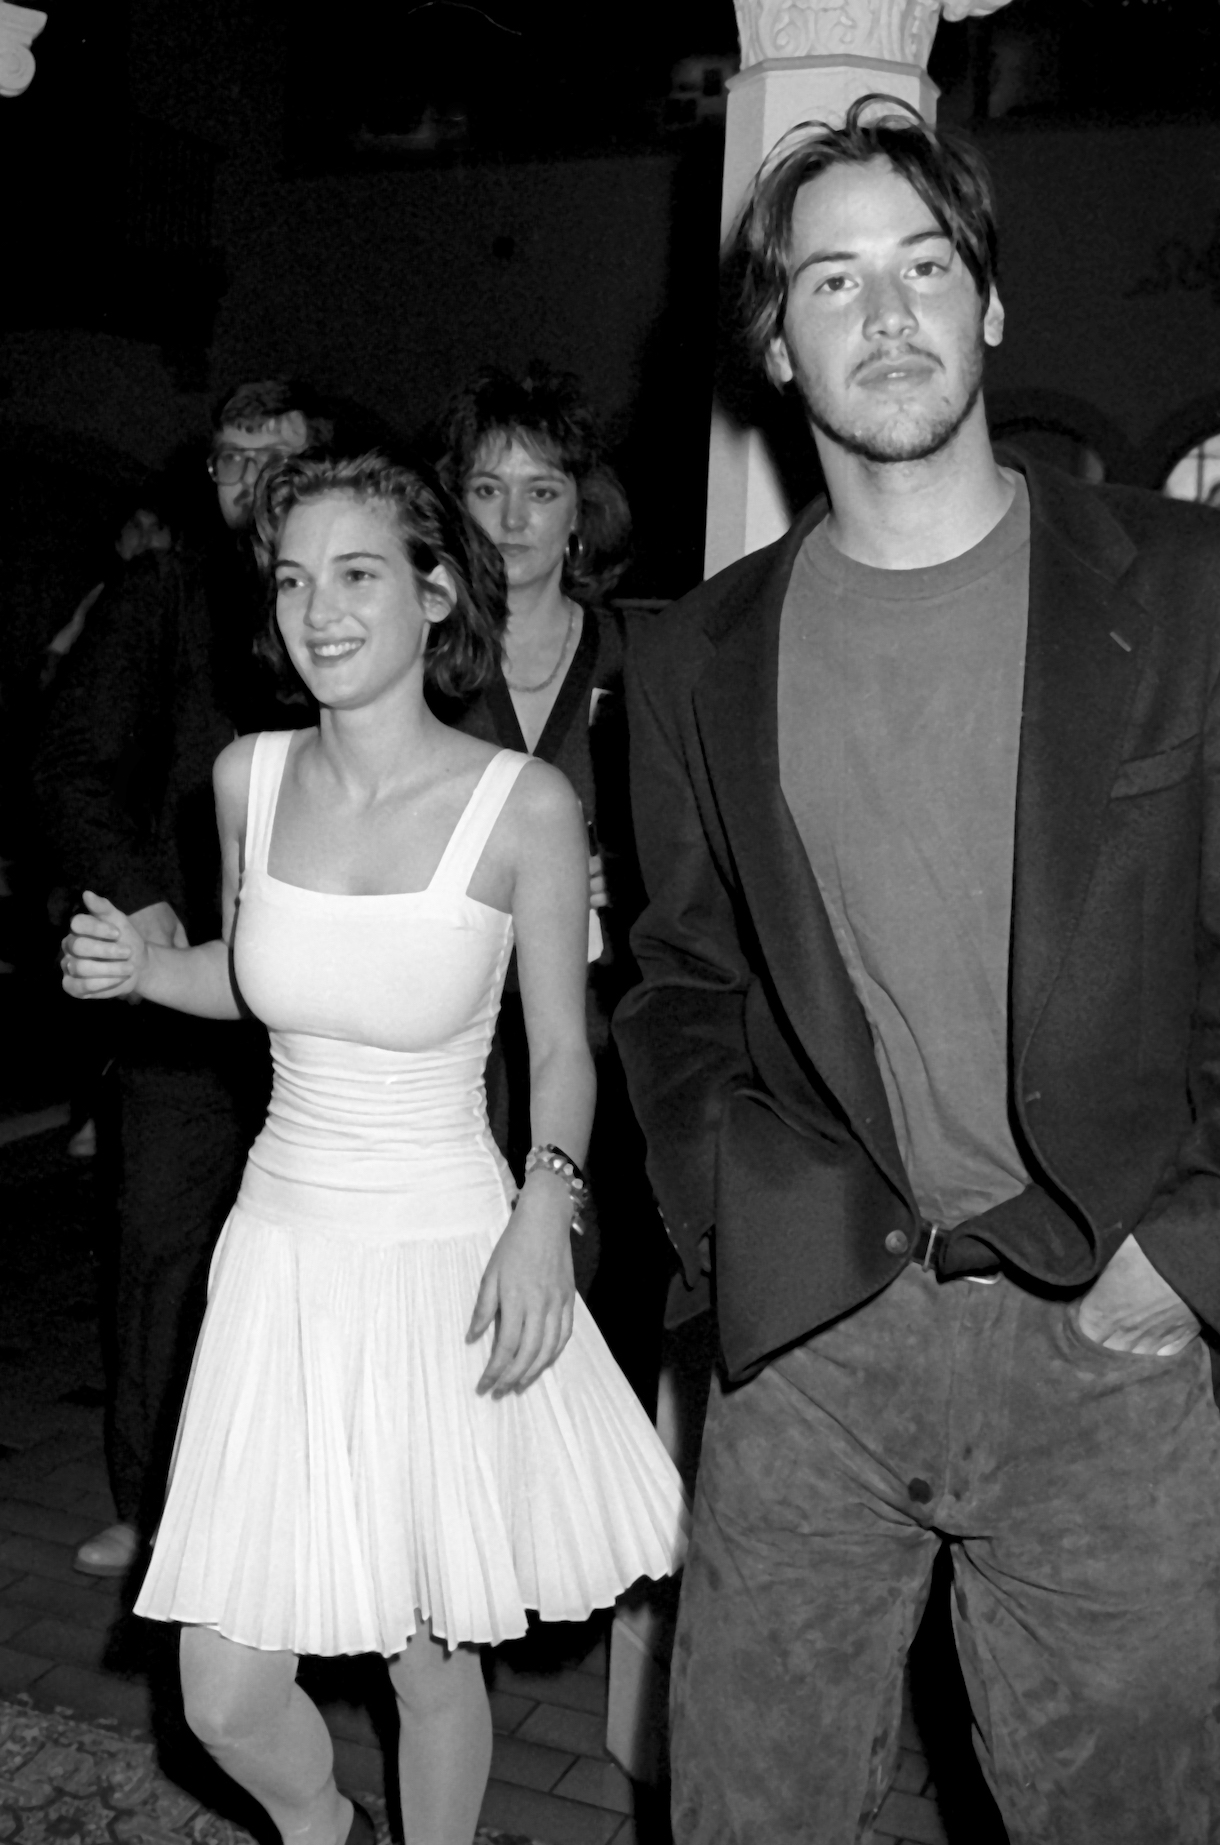 Winona Ryder and Keanu Reeves attend Fourth Annual Independent Spirit Awards on March 25, 1989